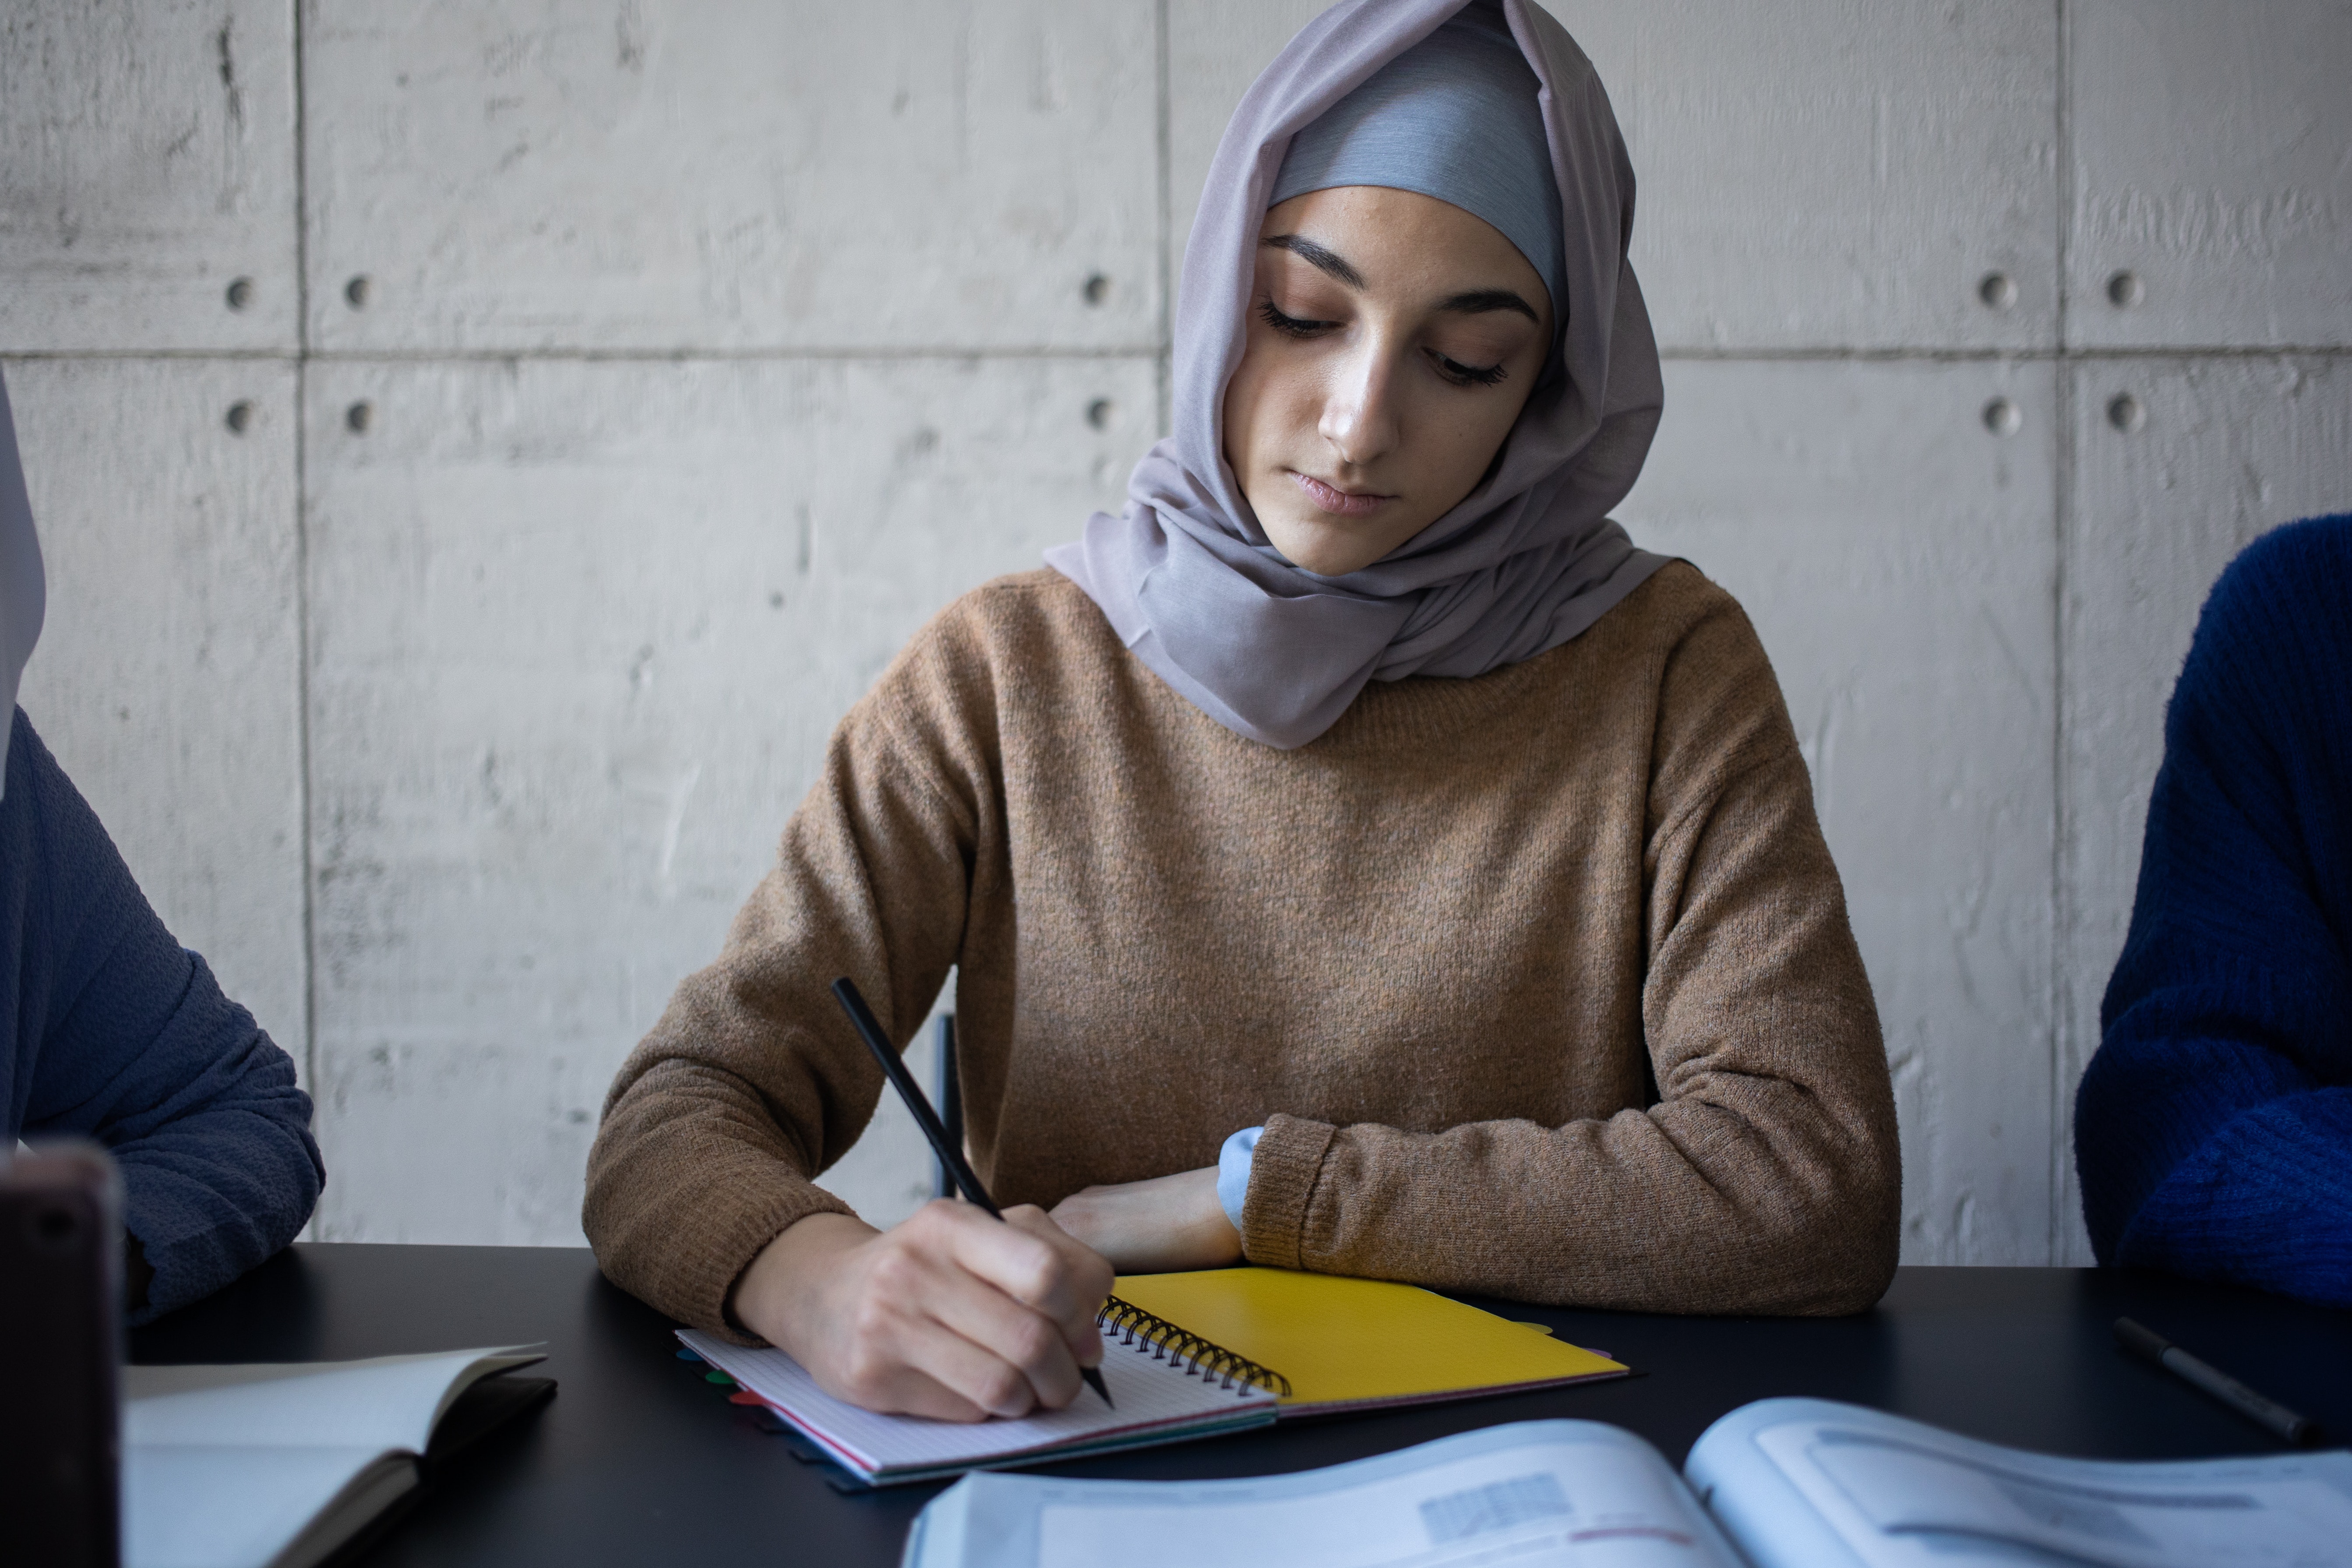 Woman with a headscarf writes in a notebook